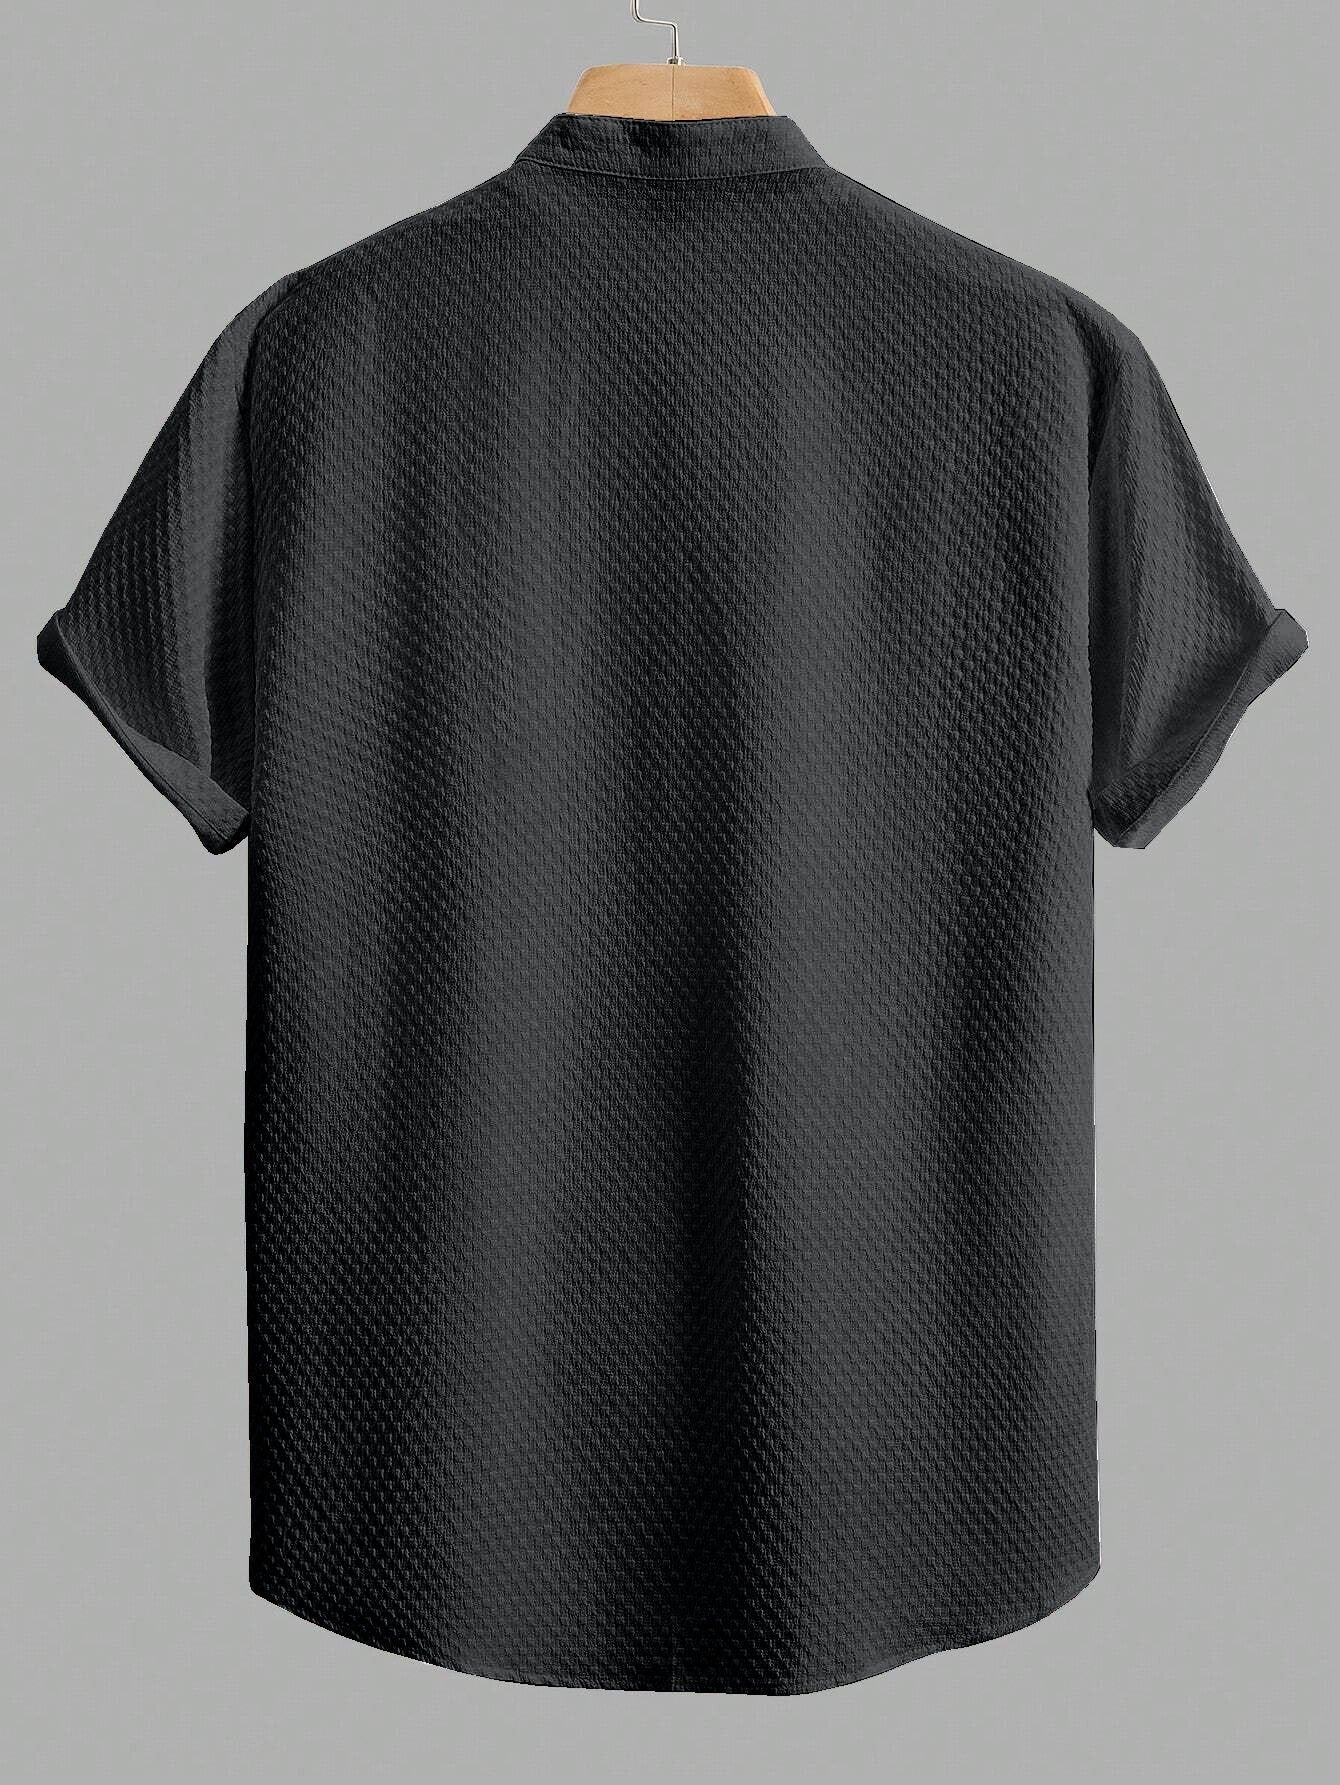 Chicken Black Plain Shirt Cotton Material for Mens Available